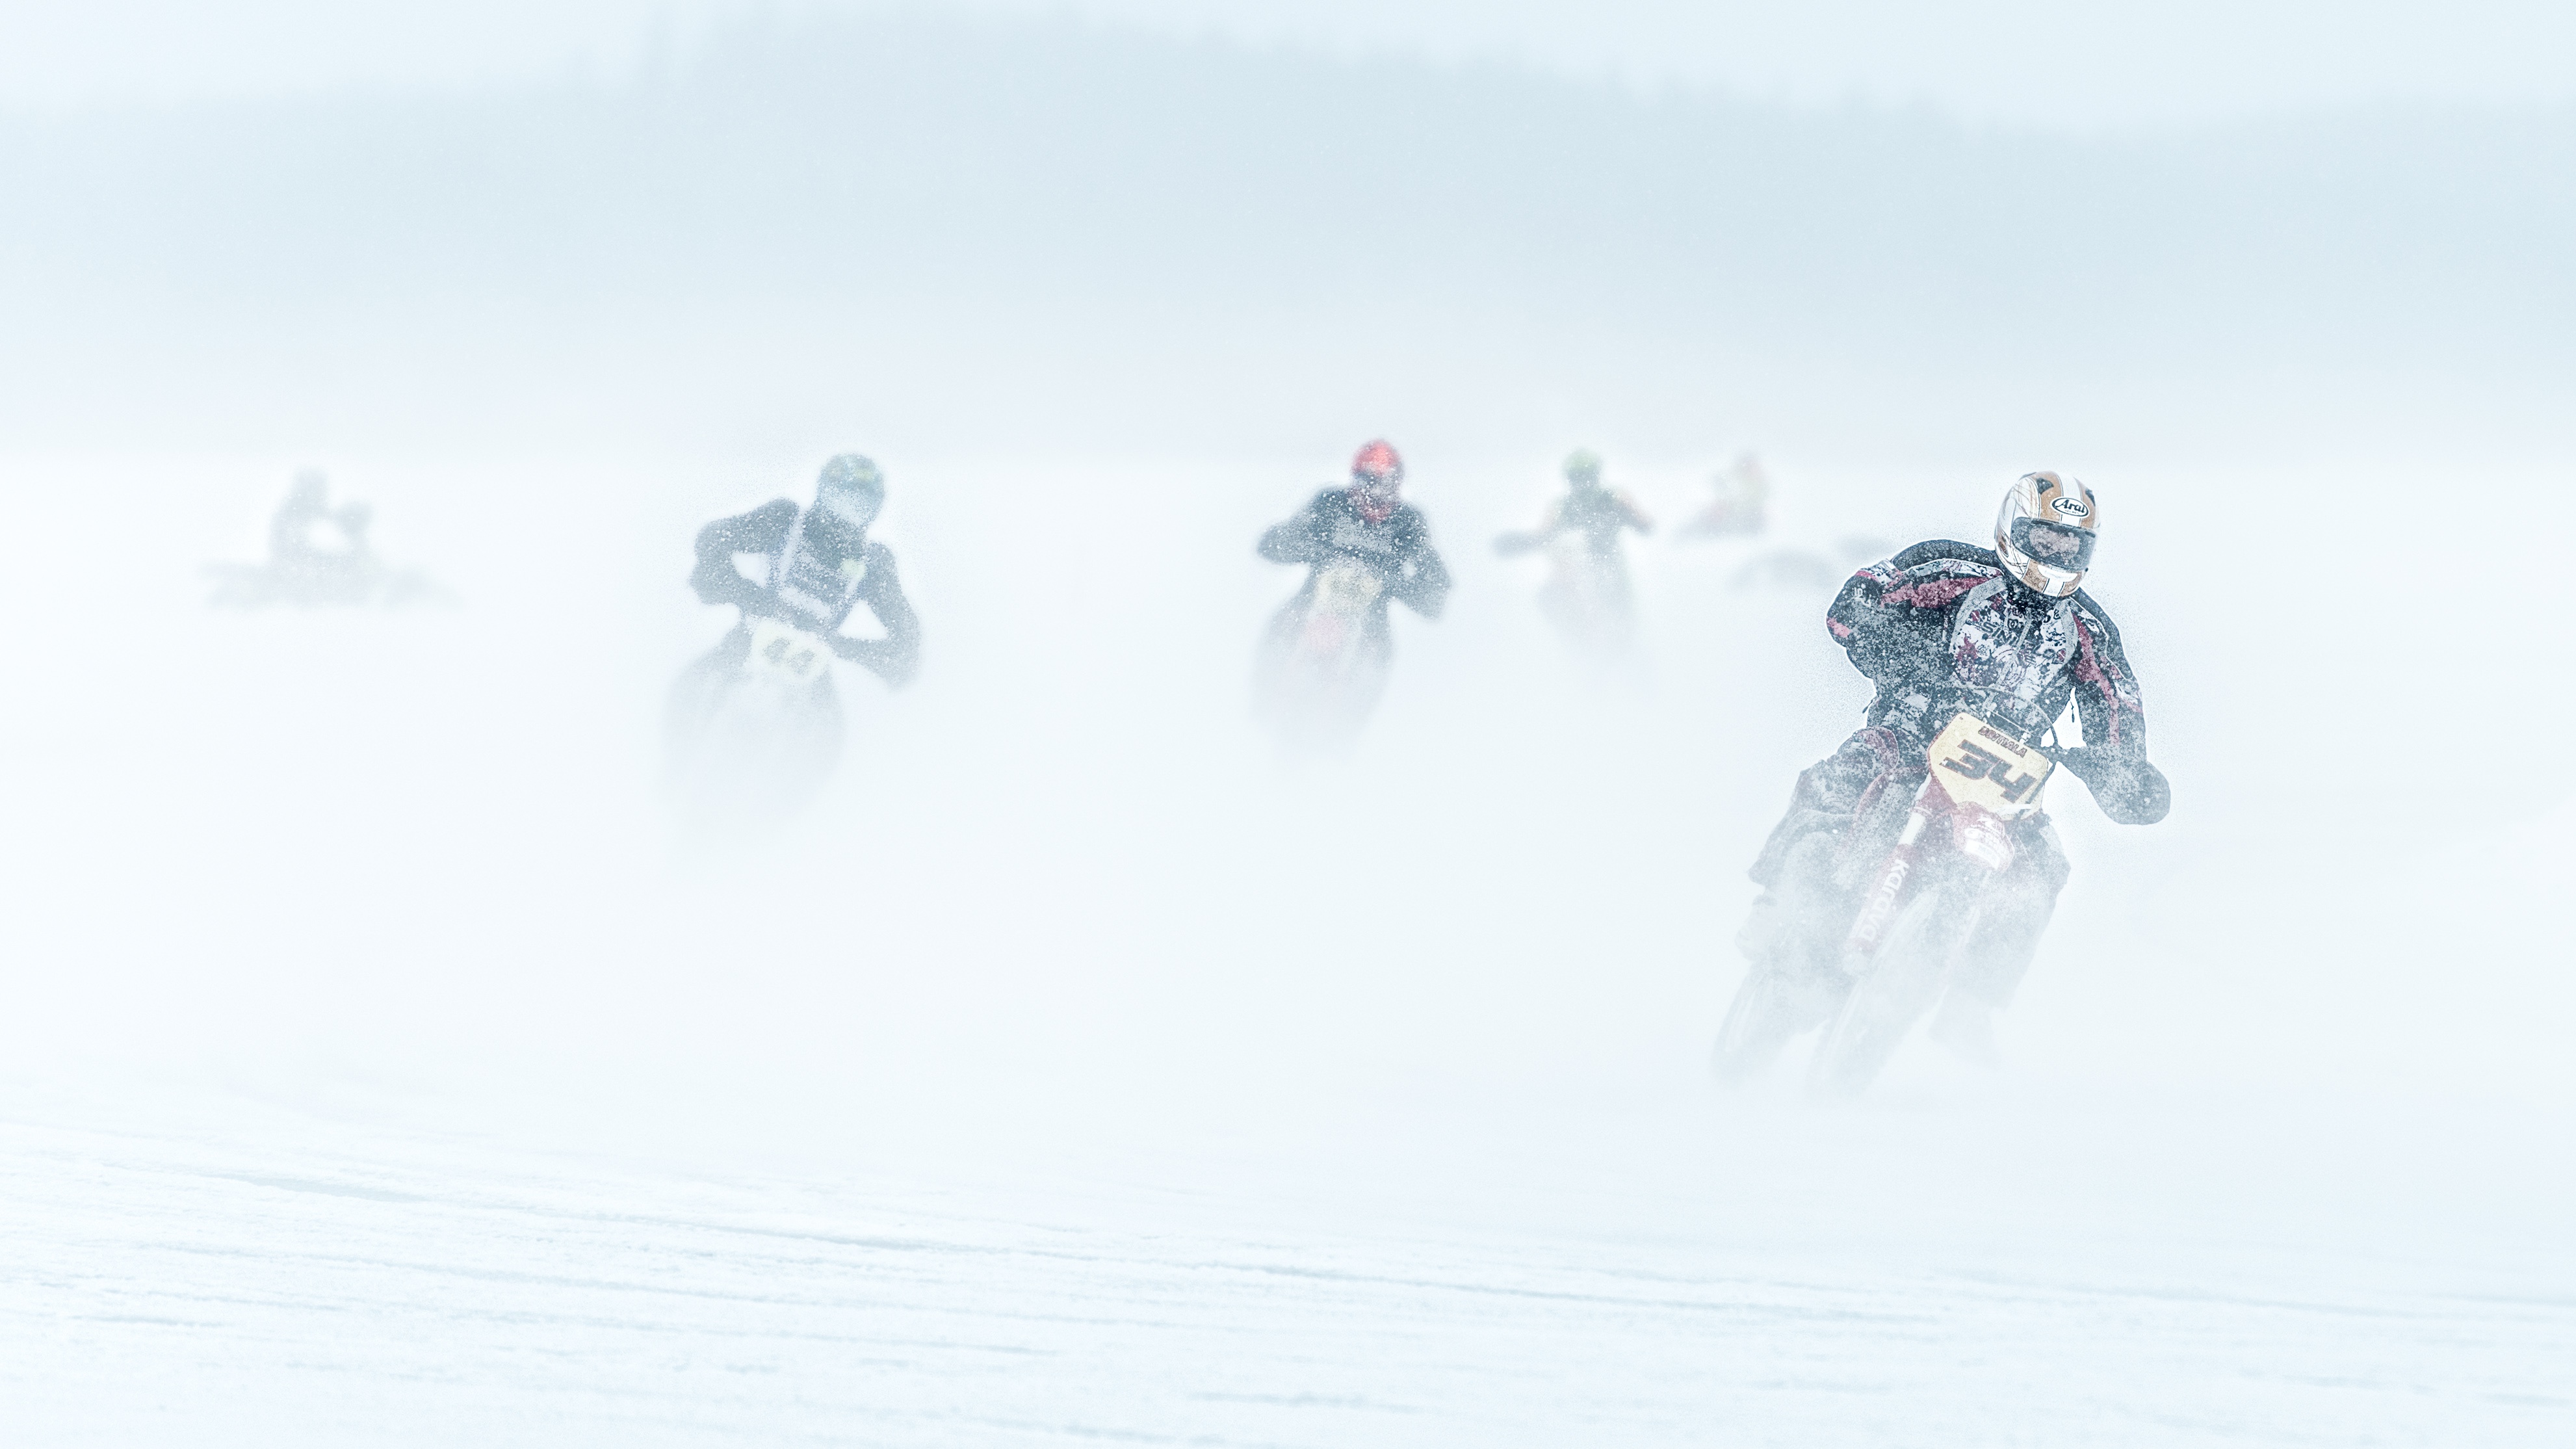 sports, motocross, motorcycle, race, snow, winter wallpaper for mobile